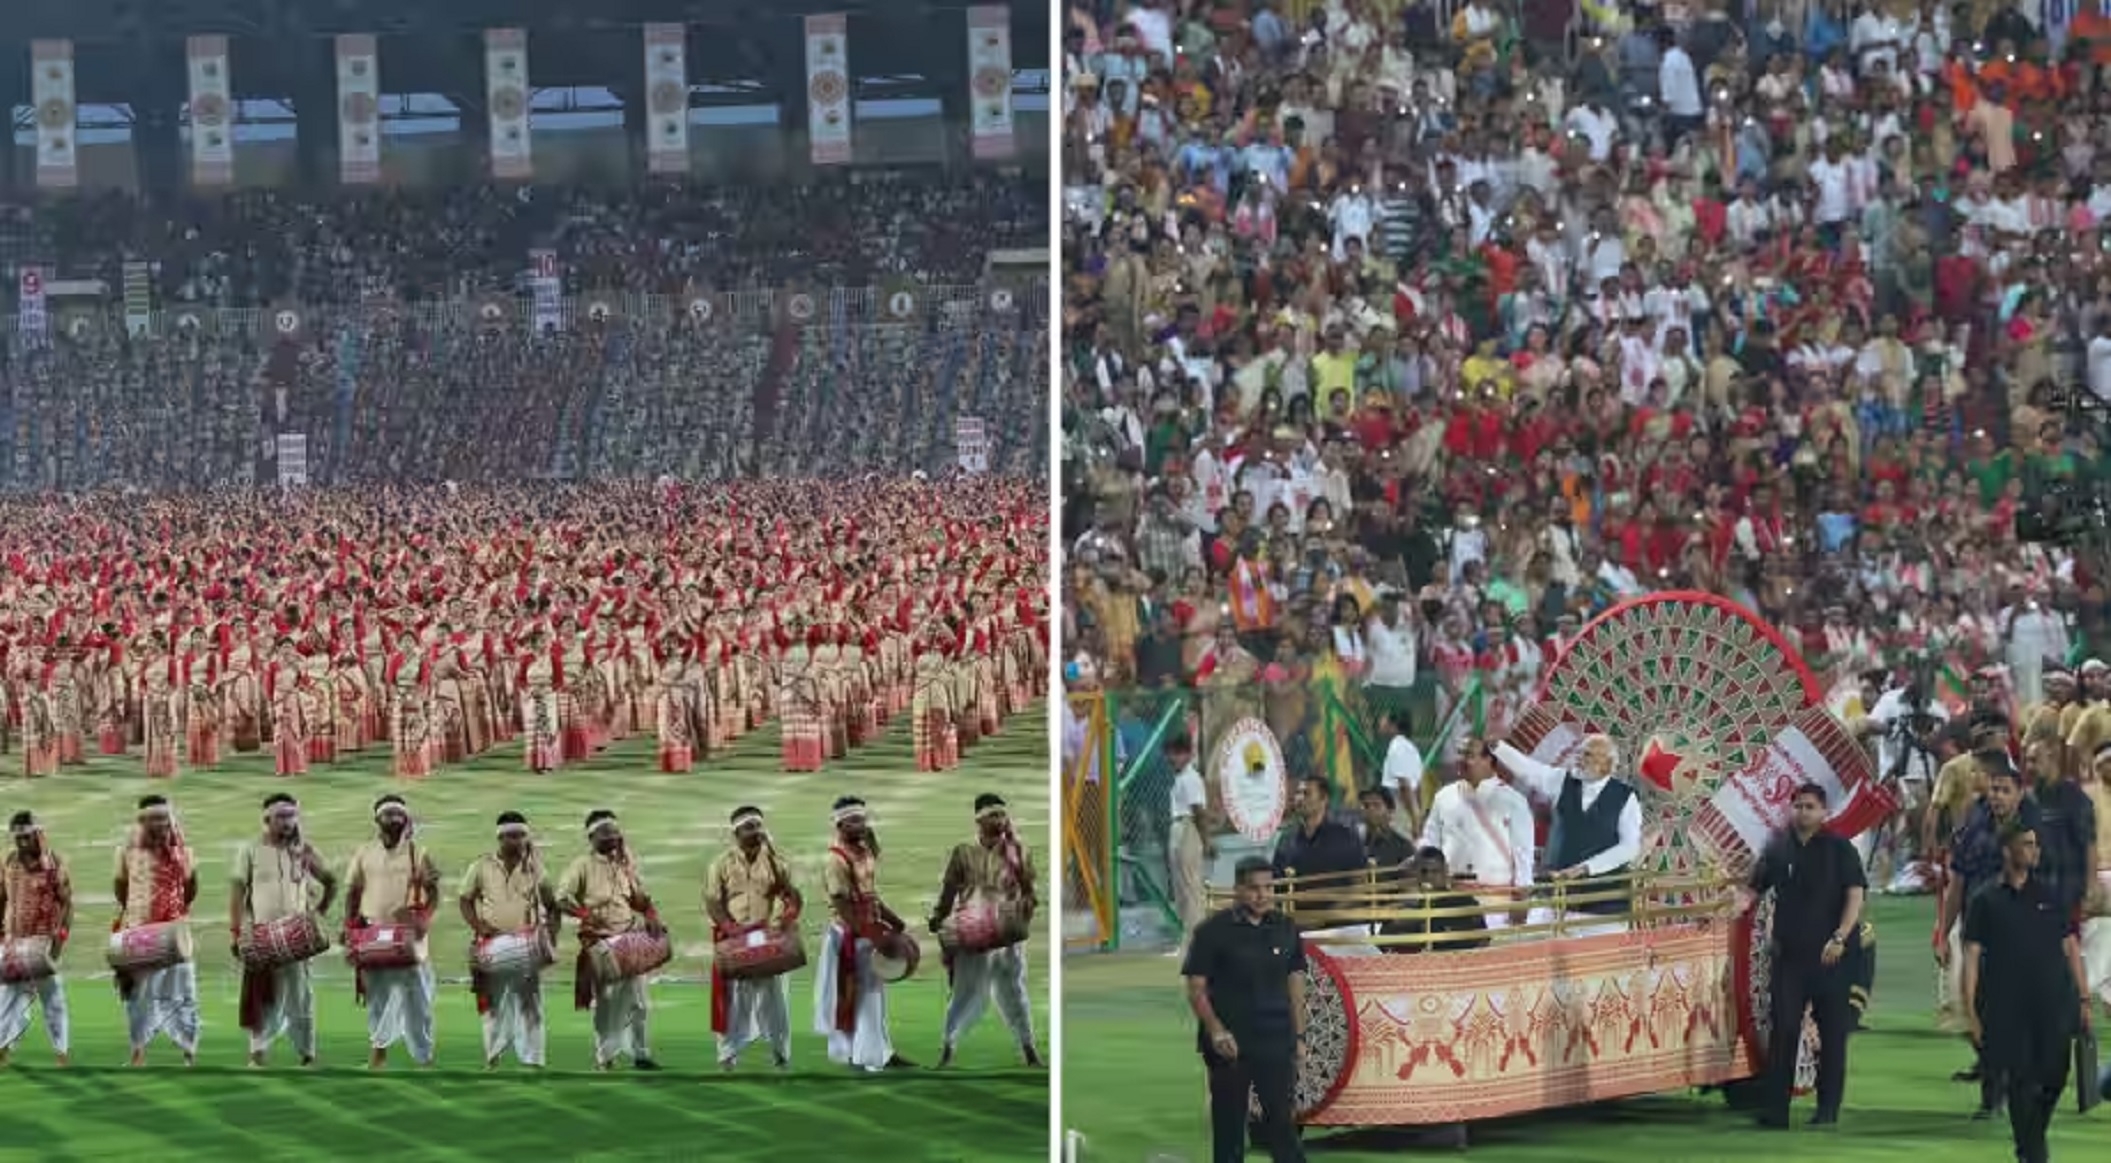 Assam Created A World Record With 11,304 Dancers Performing Bihu Dance At A Single Venue